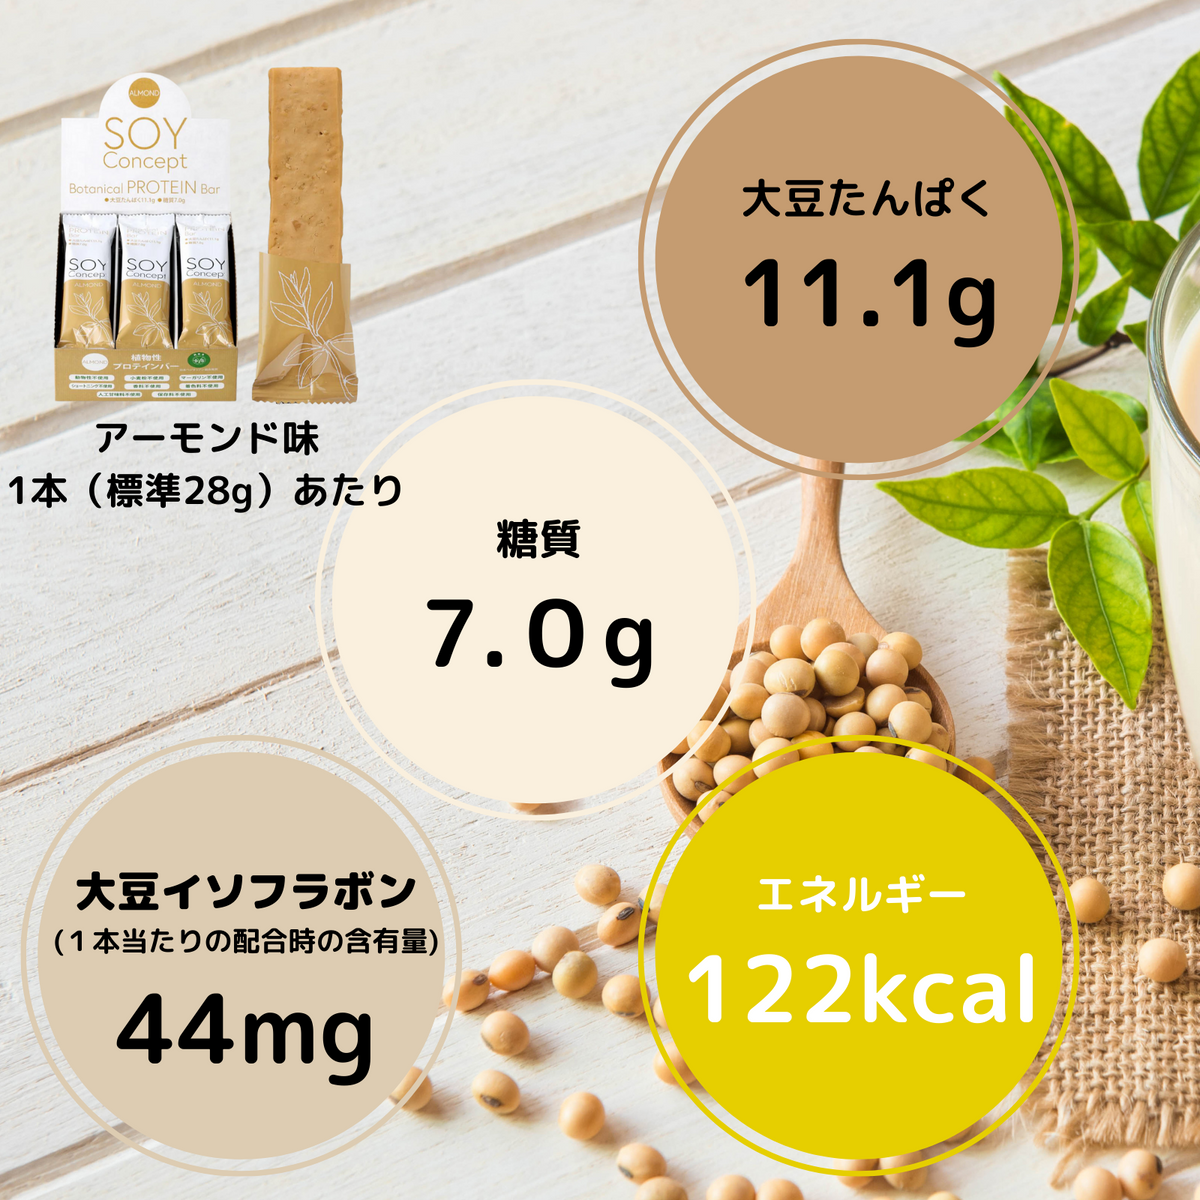 SOY Concept Almond アーモンド お得なセット